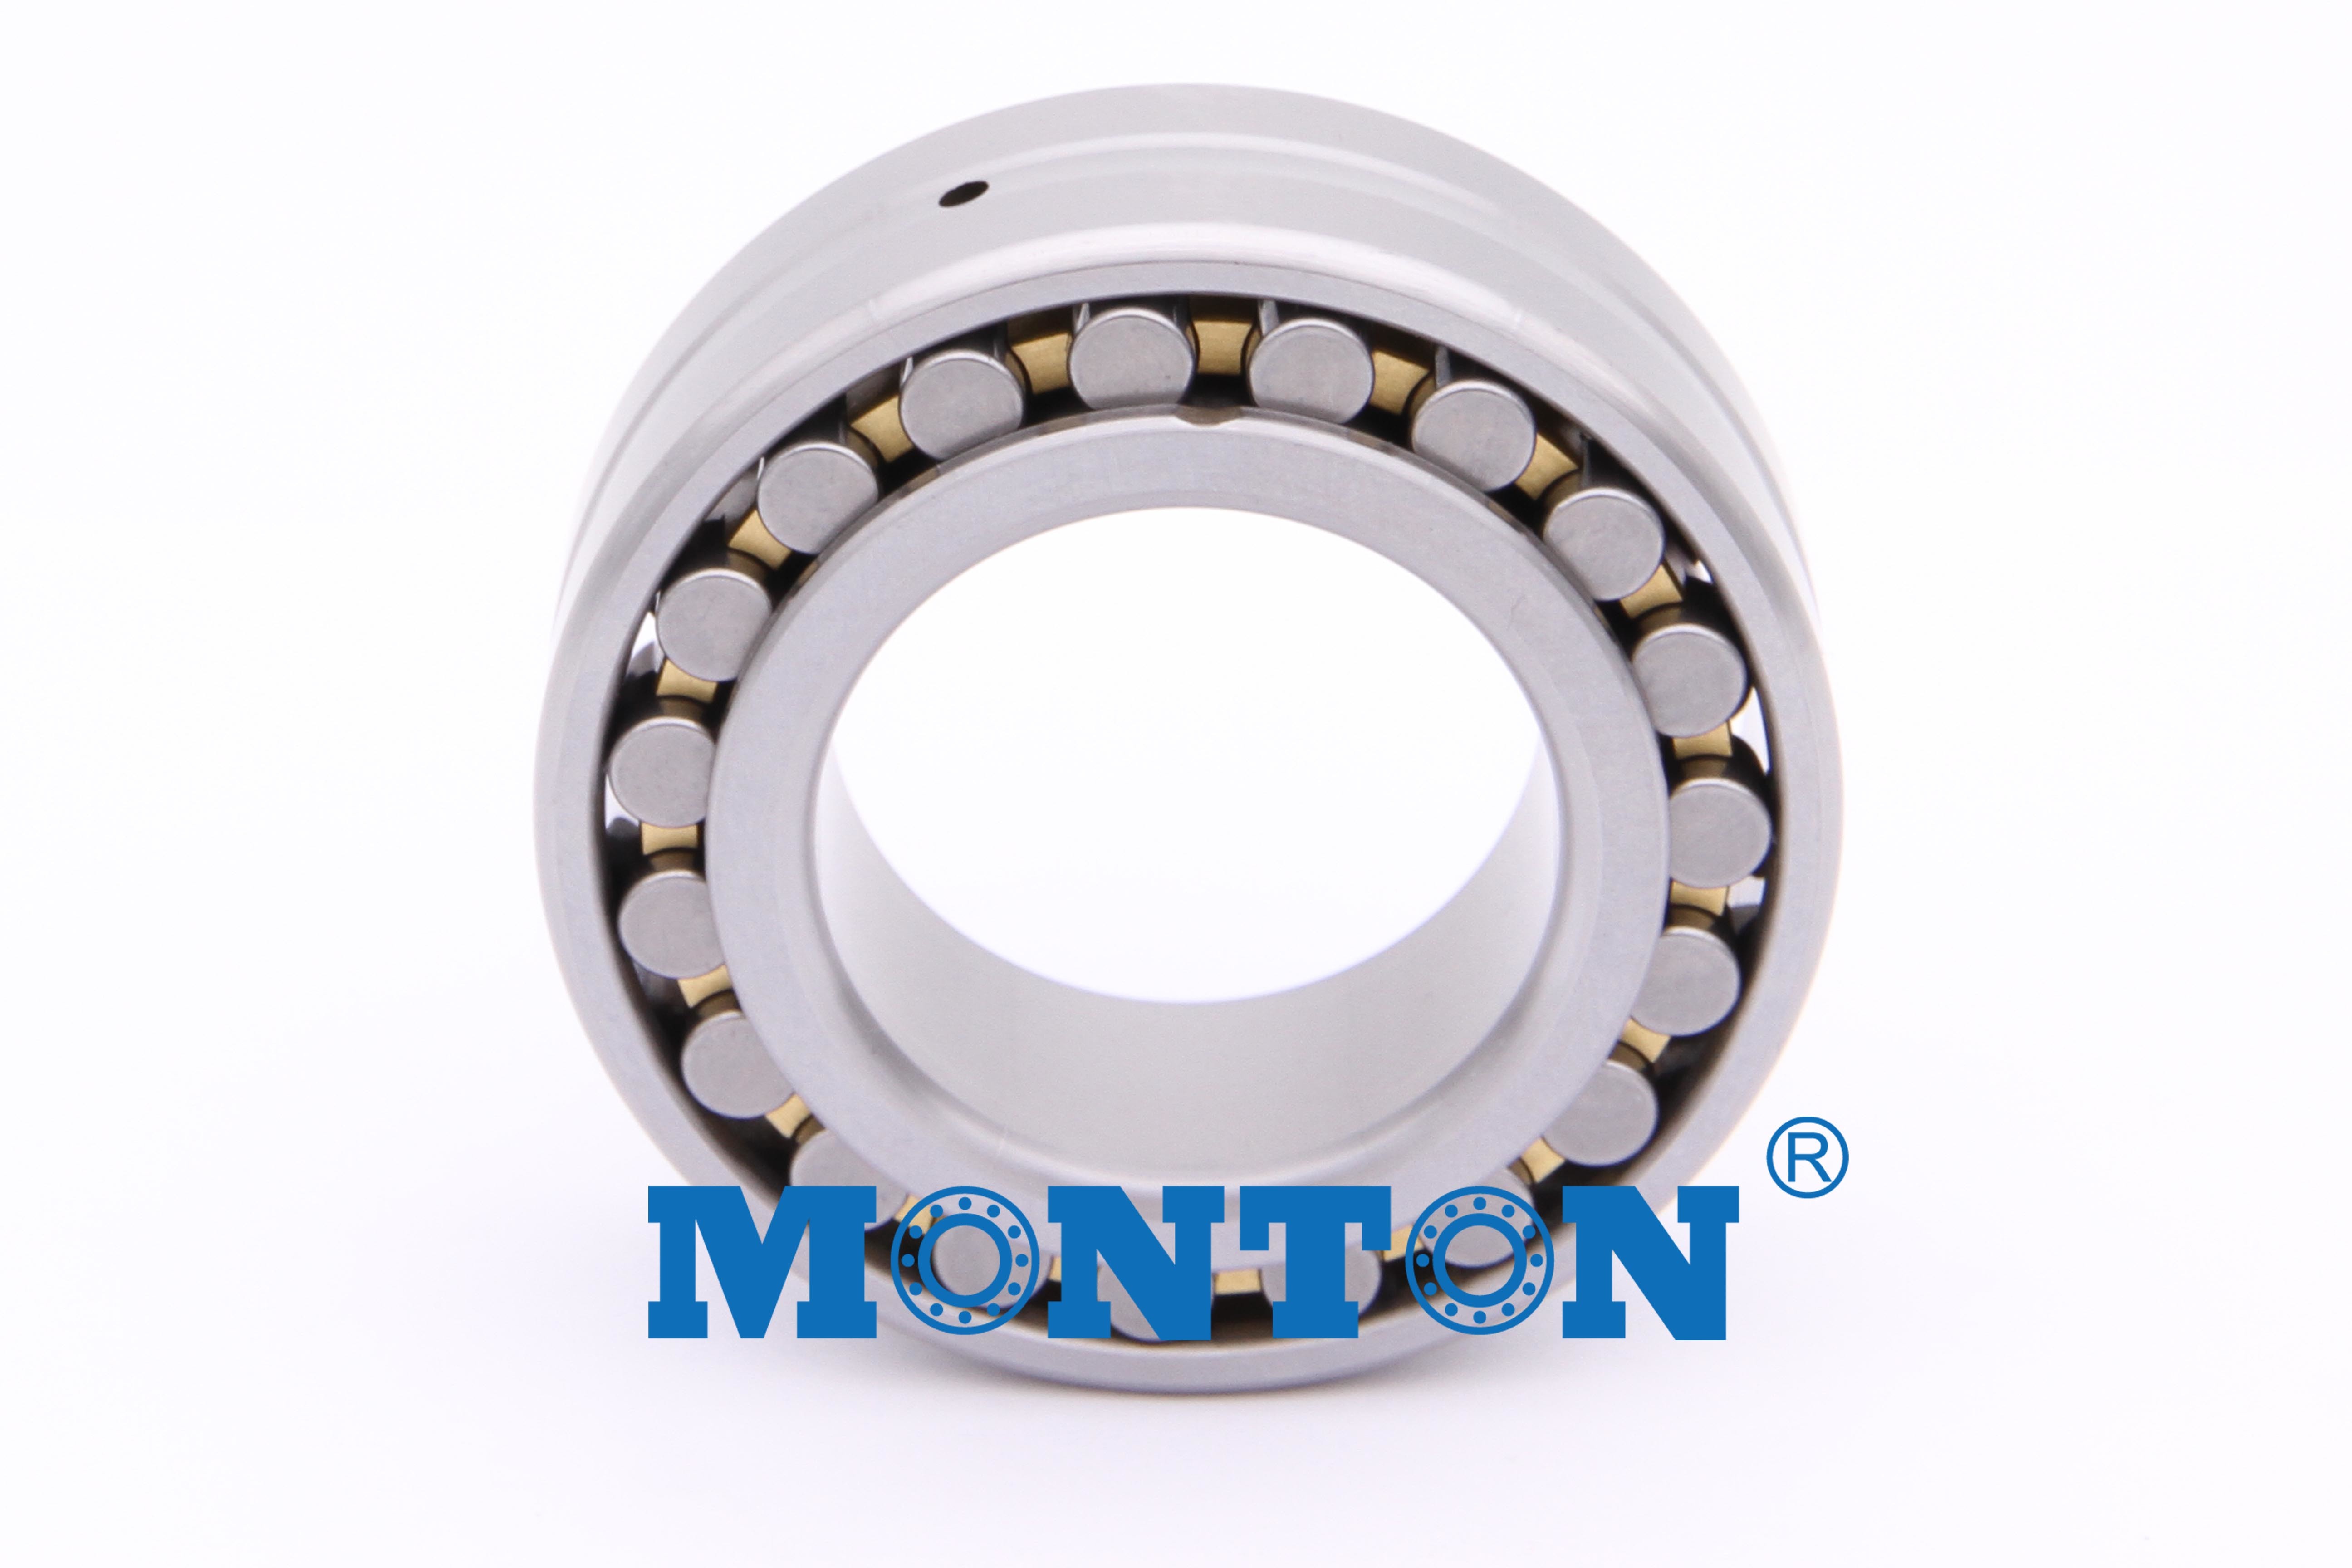 Quality NN3007-AS-K-M-SP 35x62x20 mm High Precision Cylindrical Roller Bearing  for machine tool spindle for sale